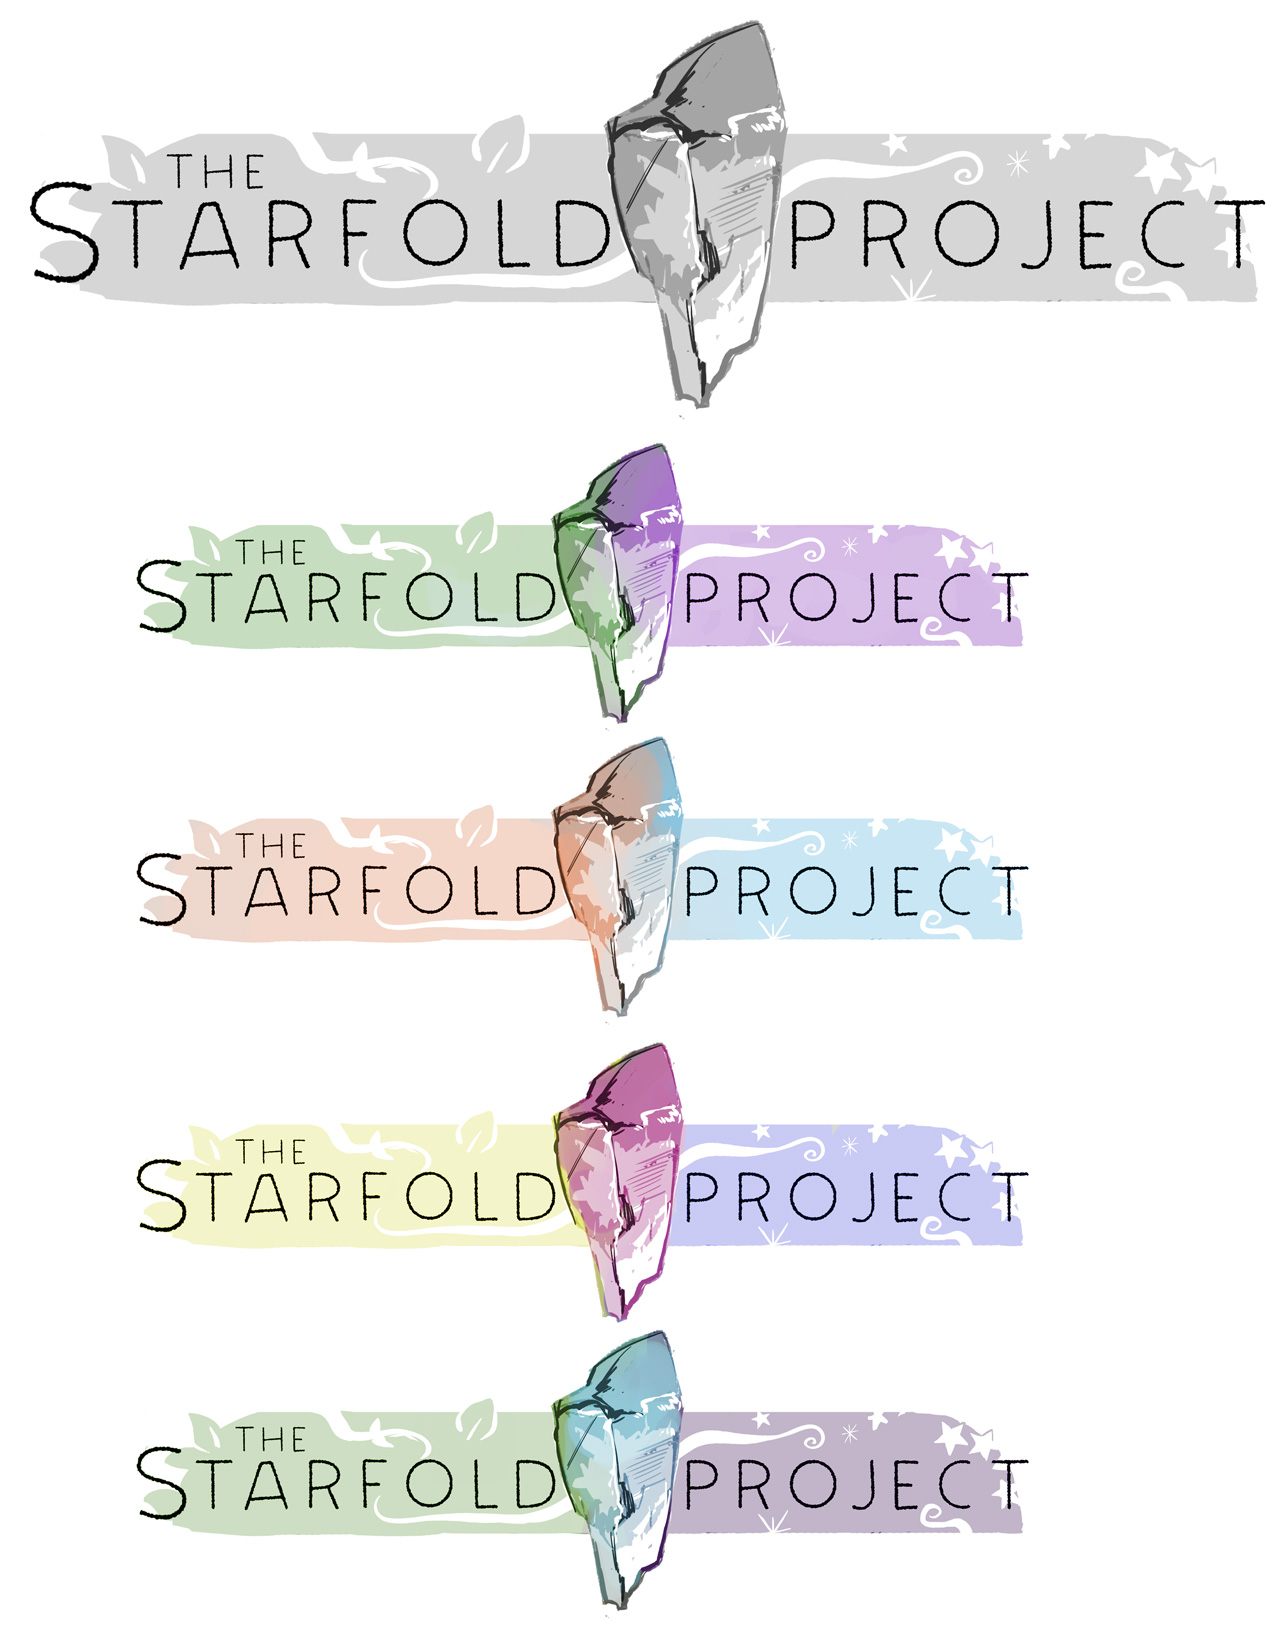 B&W and then several color sketches for 'The Starfold Project'